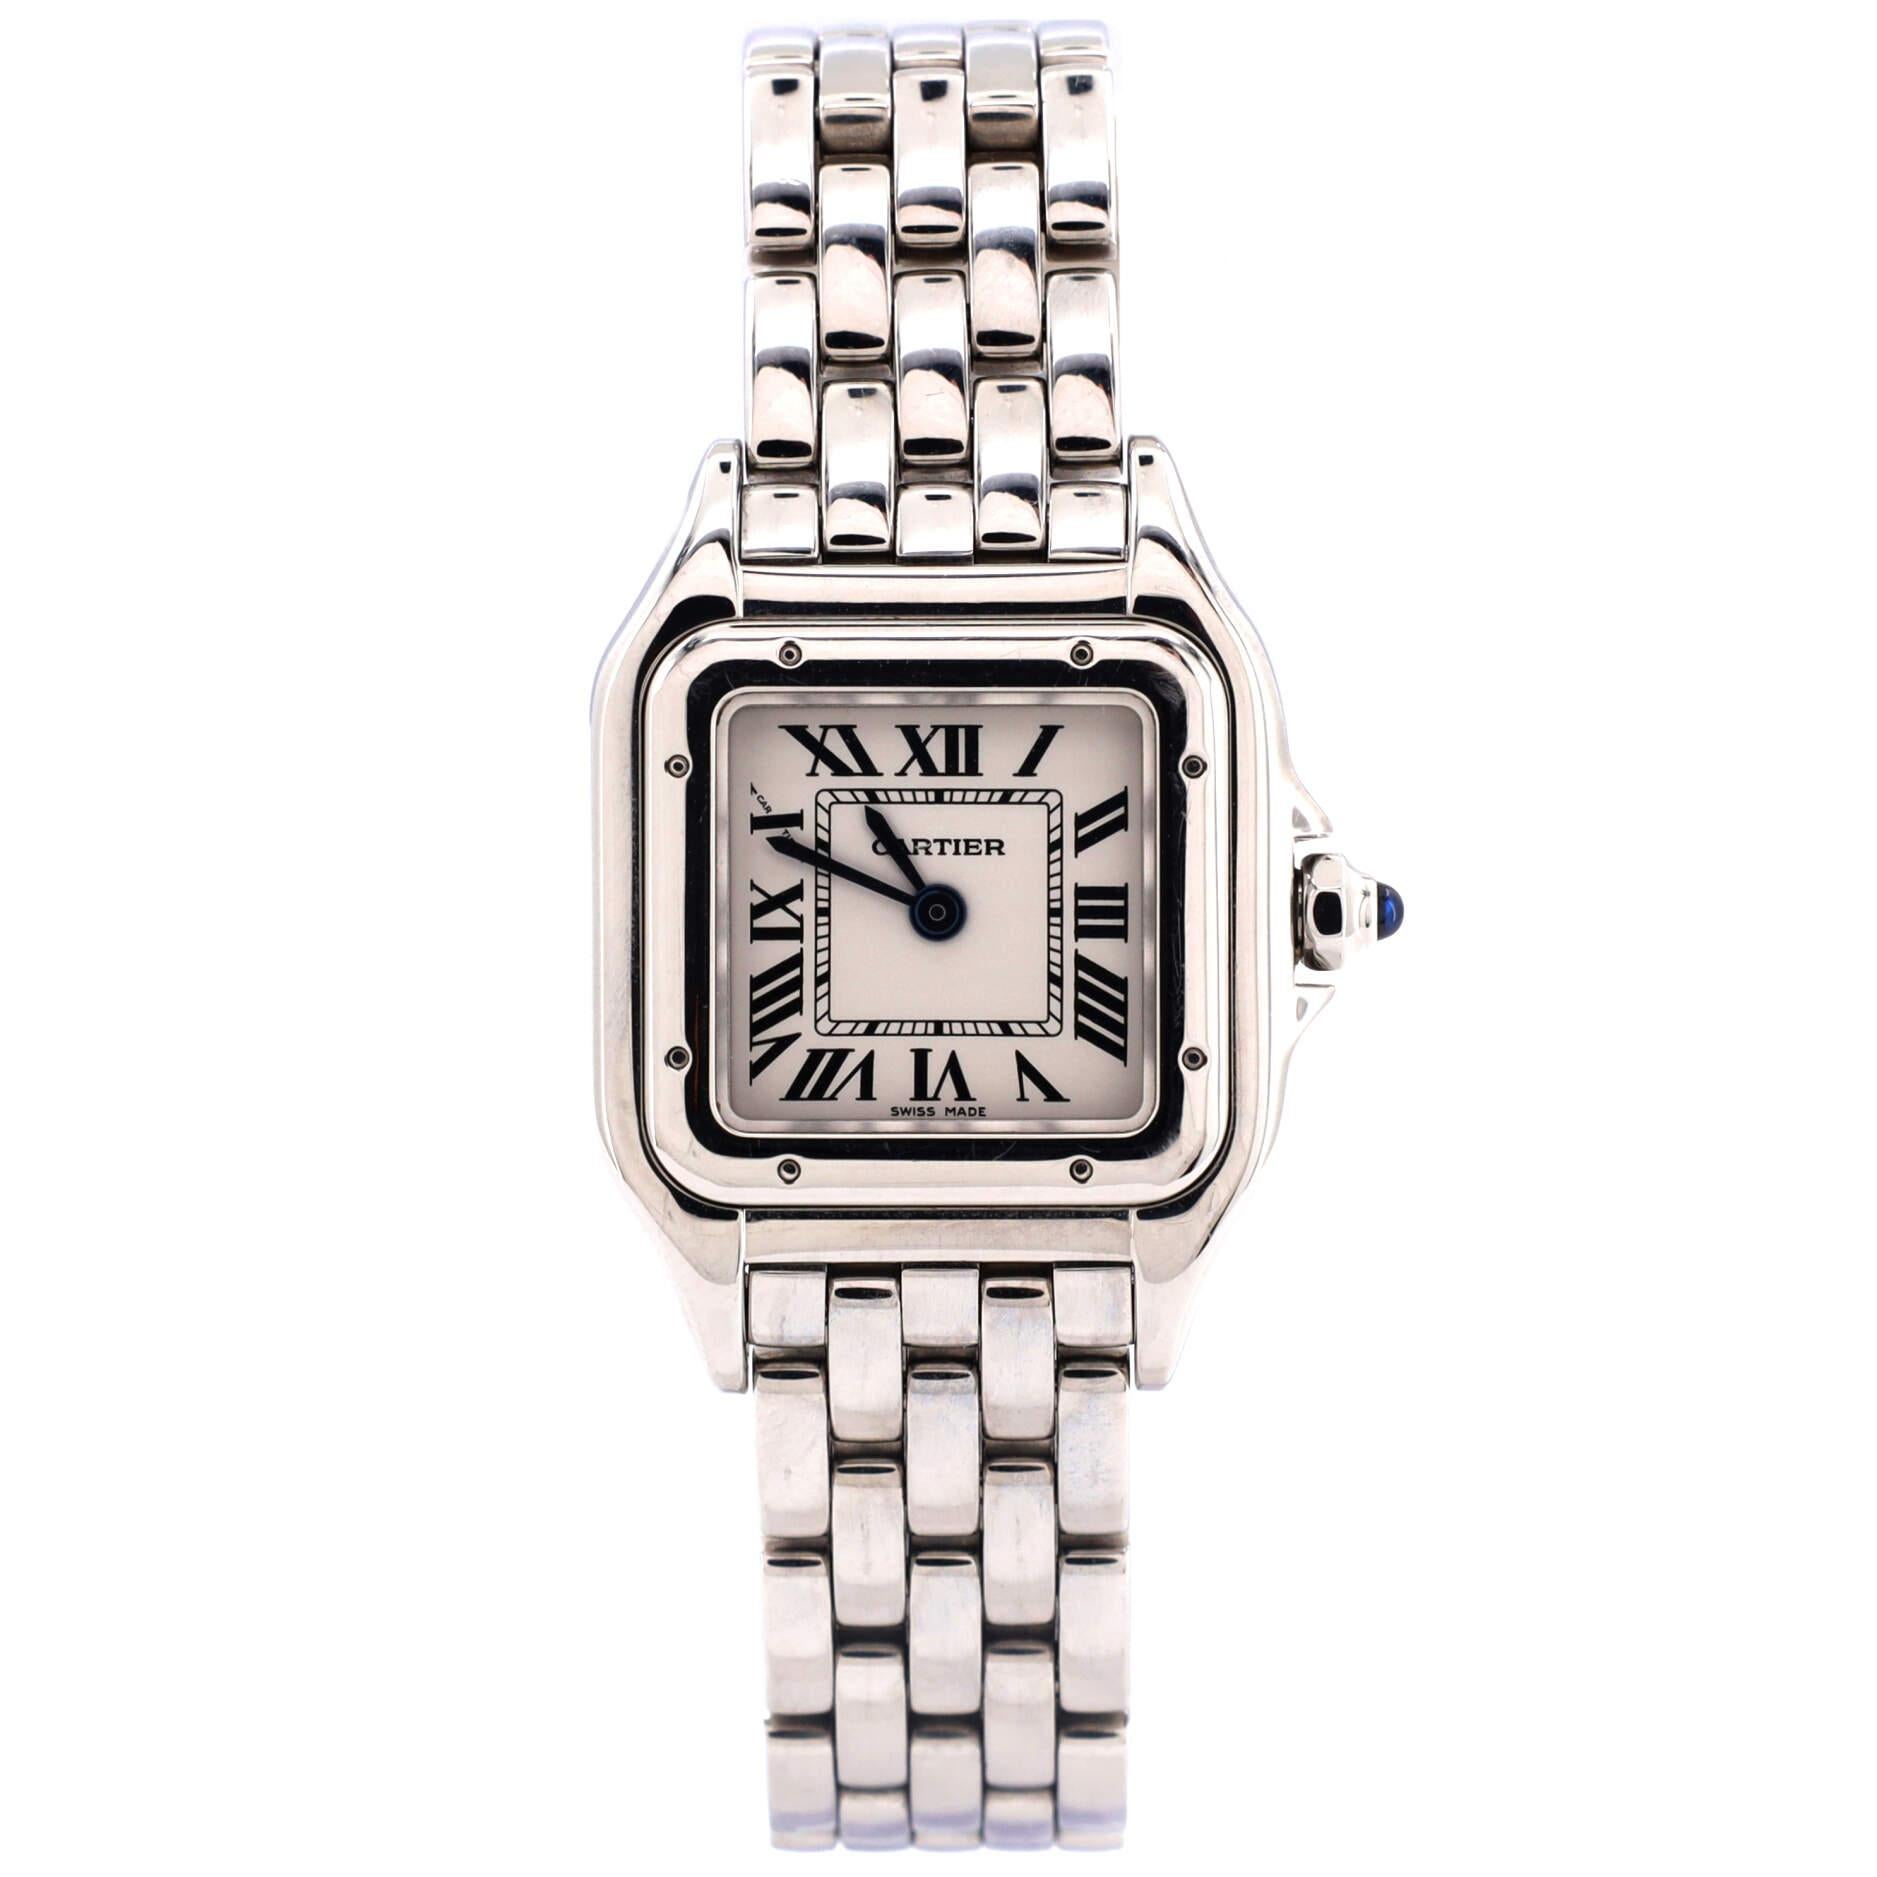 Condition: Great. Minor wear throughout case and bracelet.
Accessories: No Accessories
Measurements: Case Size/Width: 22mm, Watch Height: 6mm, Band Width: 12mm, Wrist circumference: 5.5